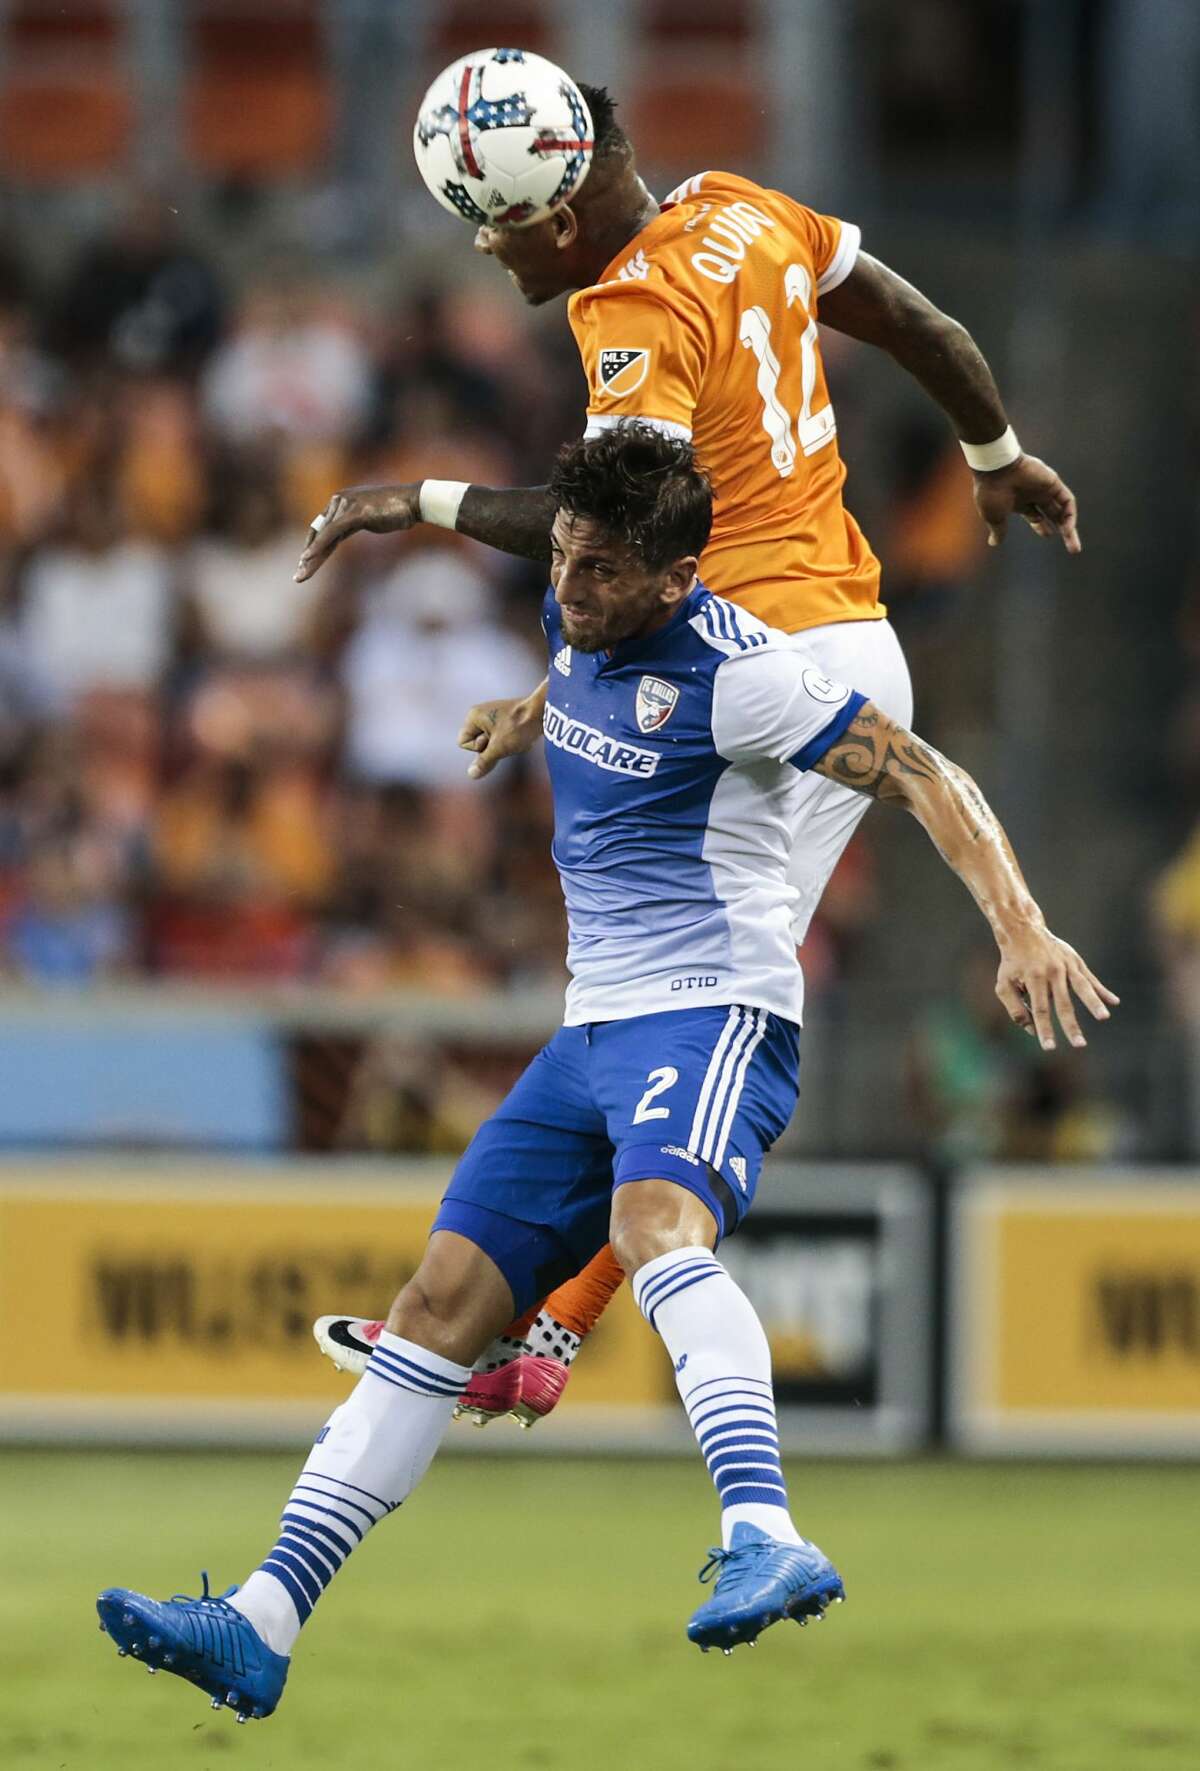 Houston Dynamo forward Romell Quioto (12) and FC Dallas defender Hernan Grana (2) go after the ball during the first half of an MLS soccer game Friday, June 23, 2017, in Houston. (Brett Coomer/Houston Chronicle via AP)